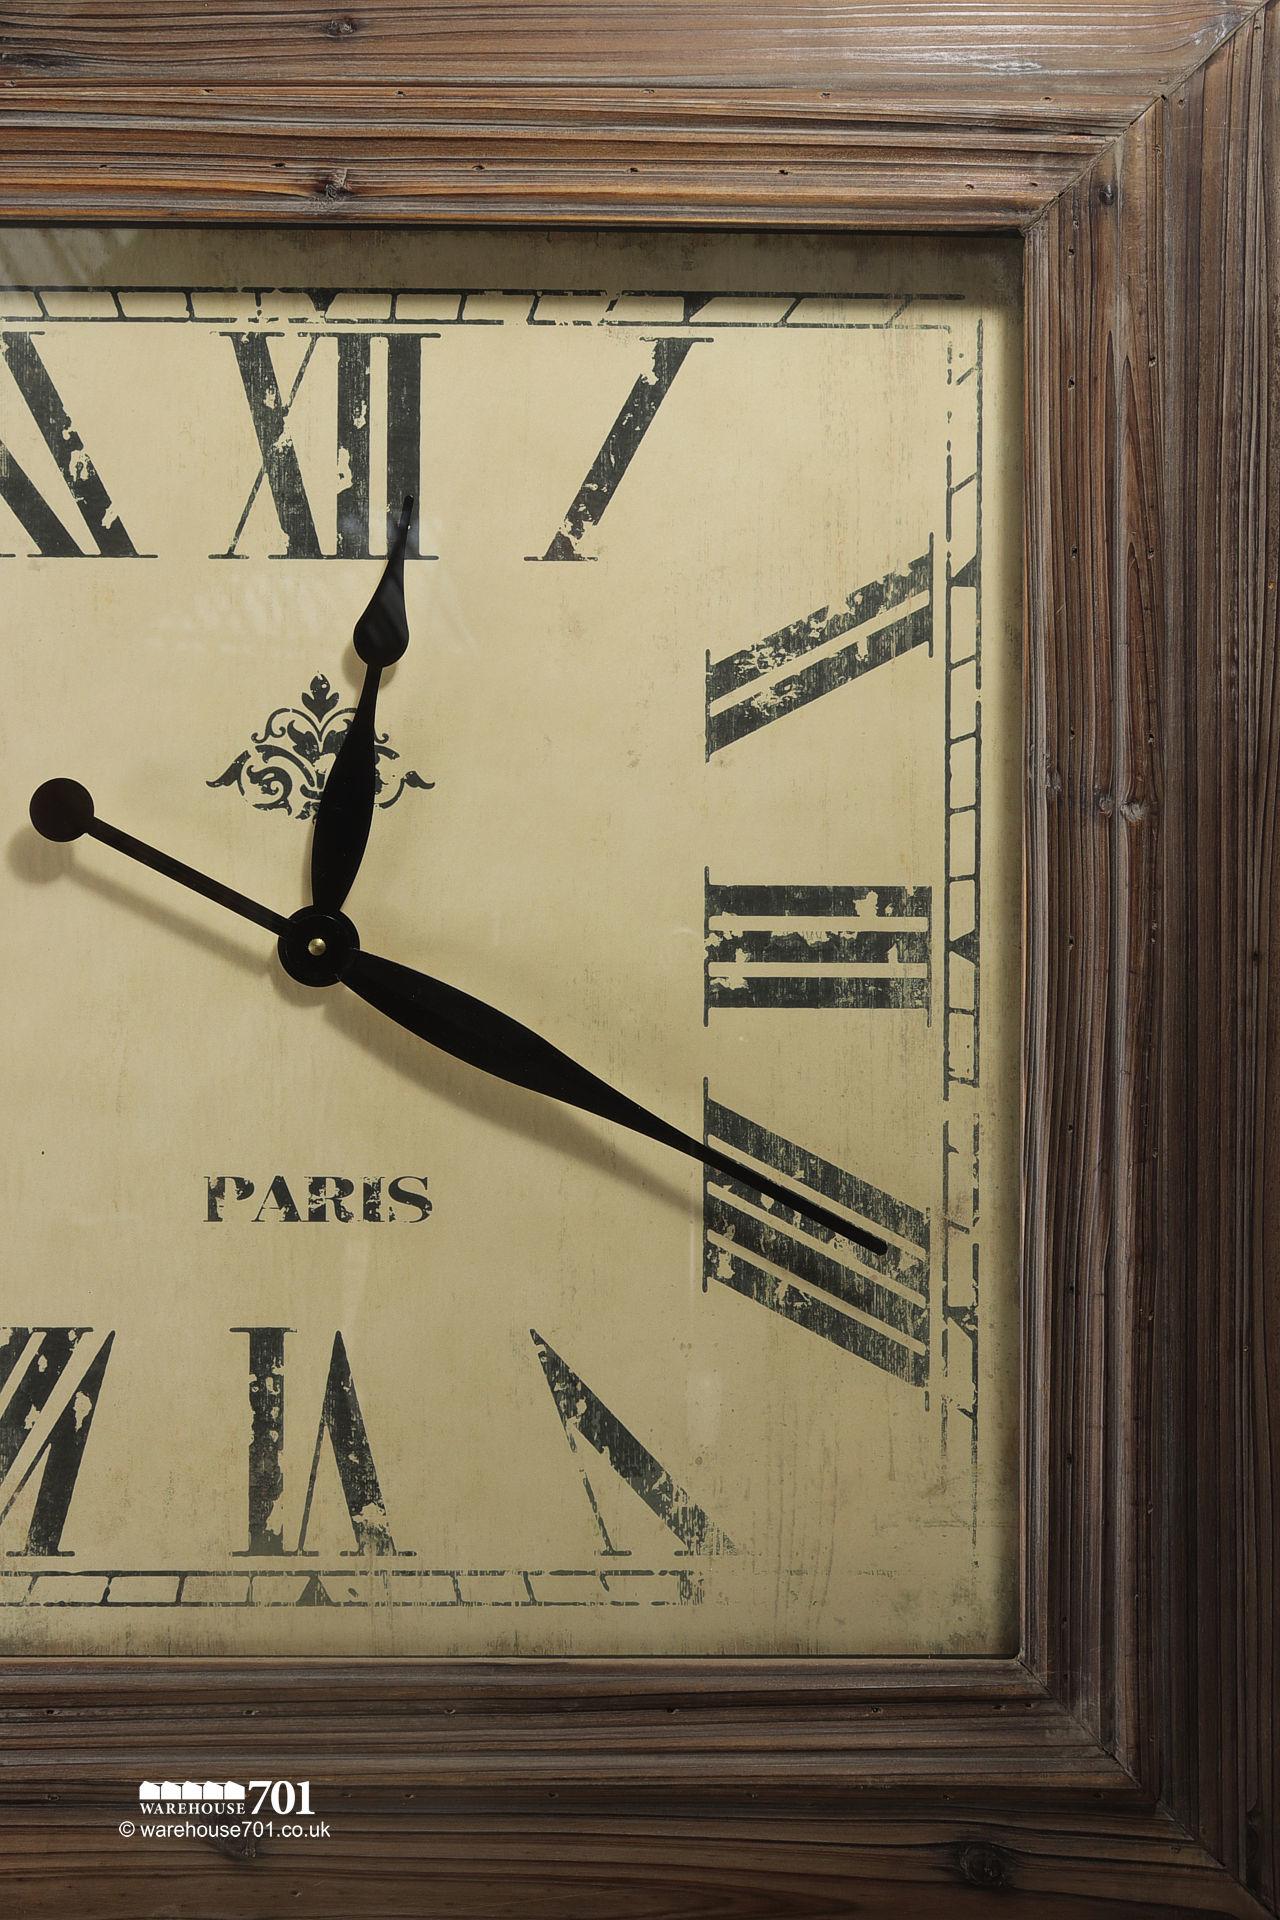 NEW Large Square Wood Effect Wall Clock in an Antique Style #3